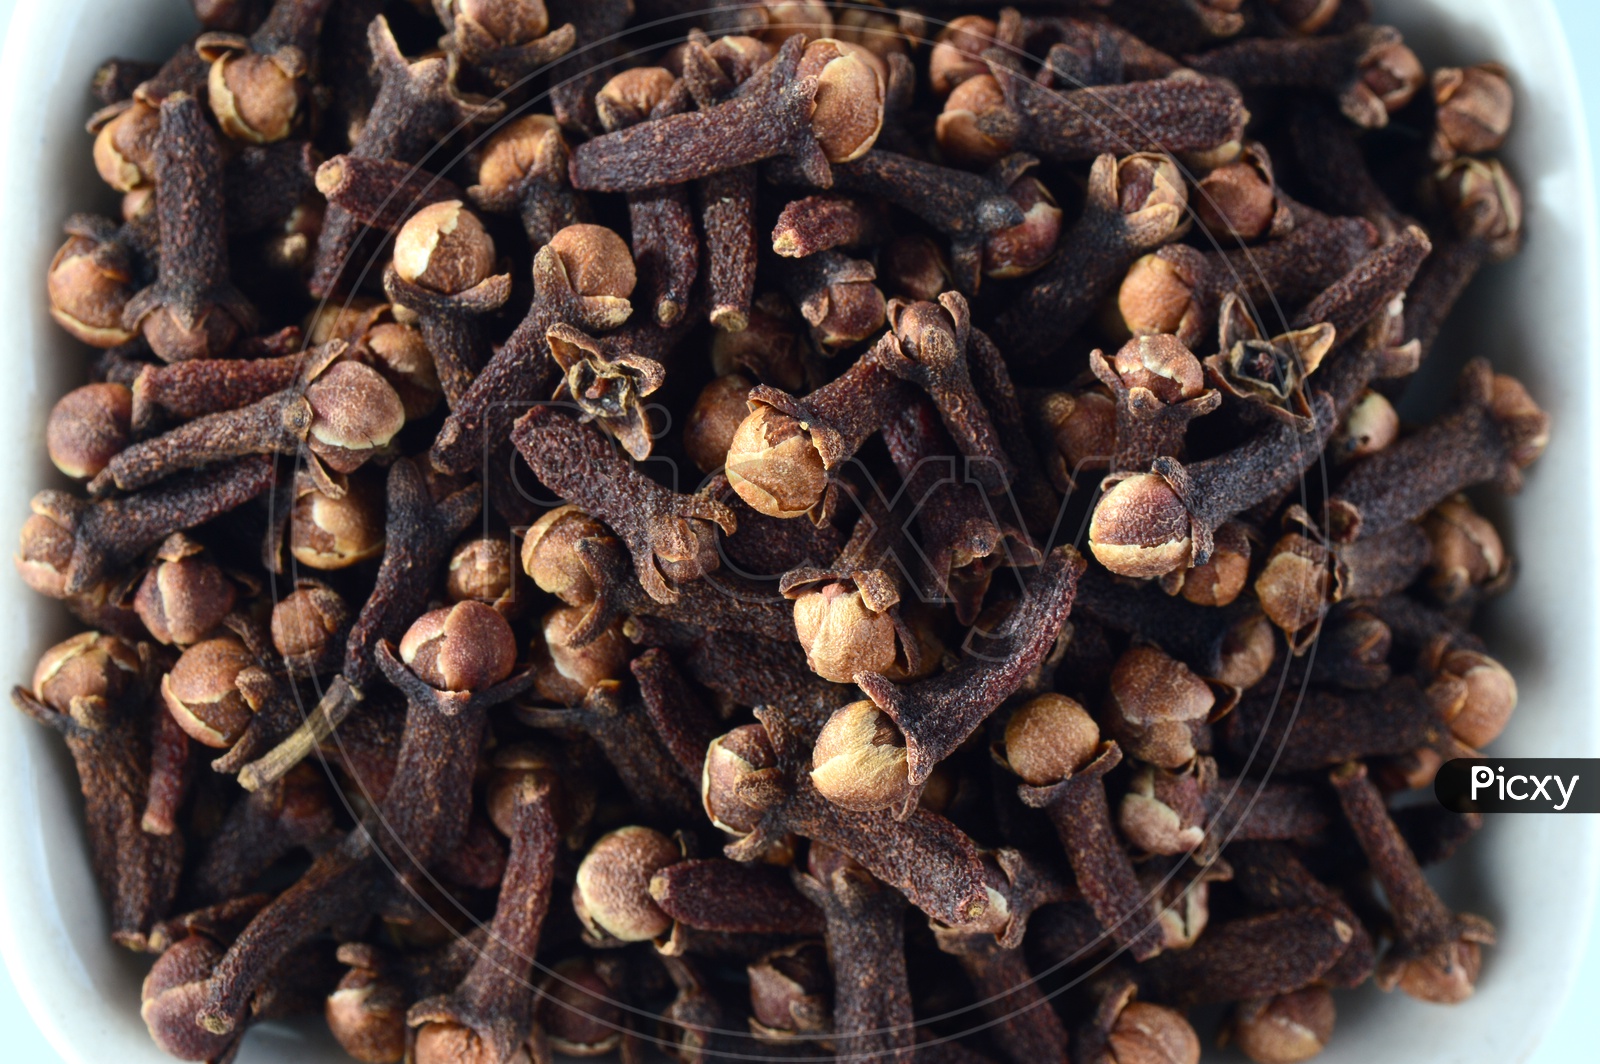 Indian Cloves Or Indian Spices Cloves Pile   Background